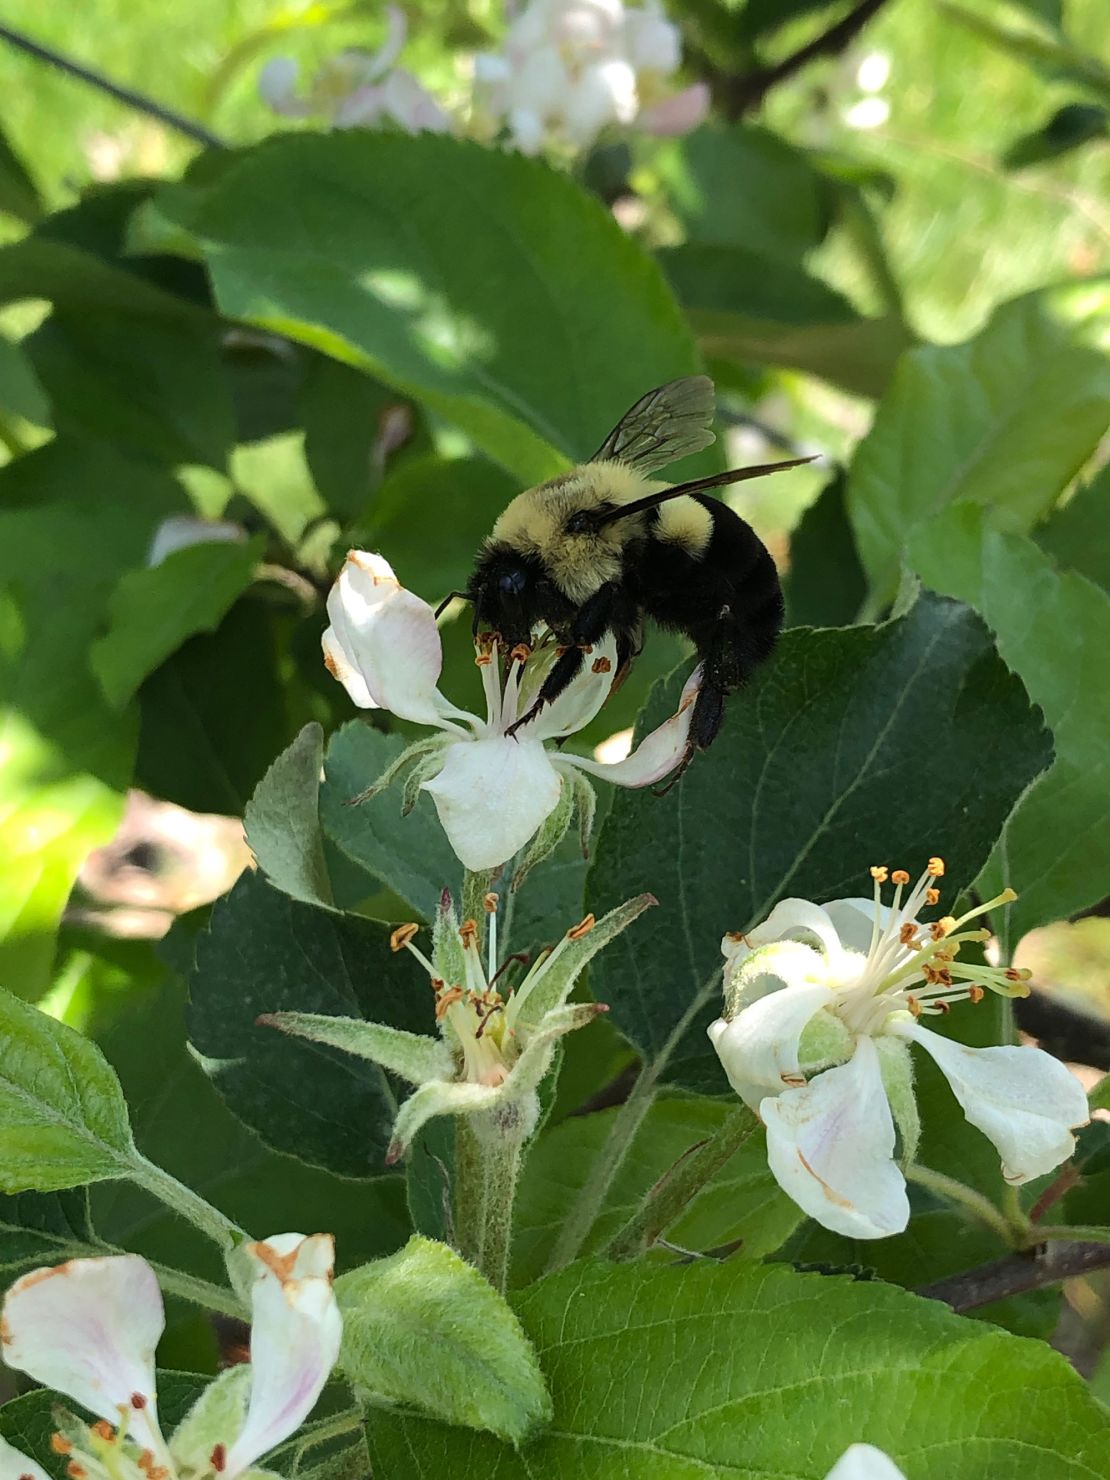 A common eastern bumblebee queen is seen on an apple blossom.